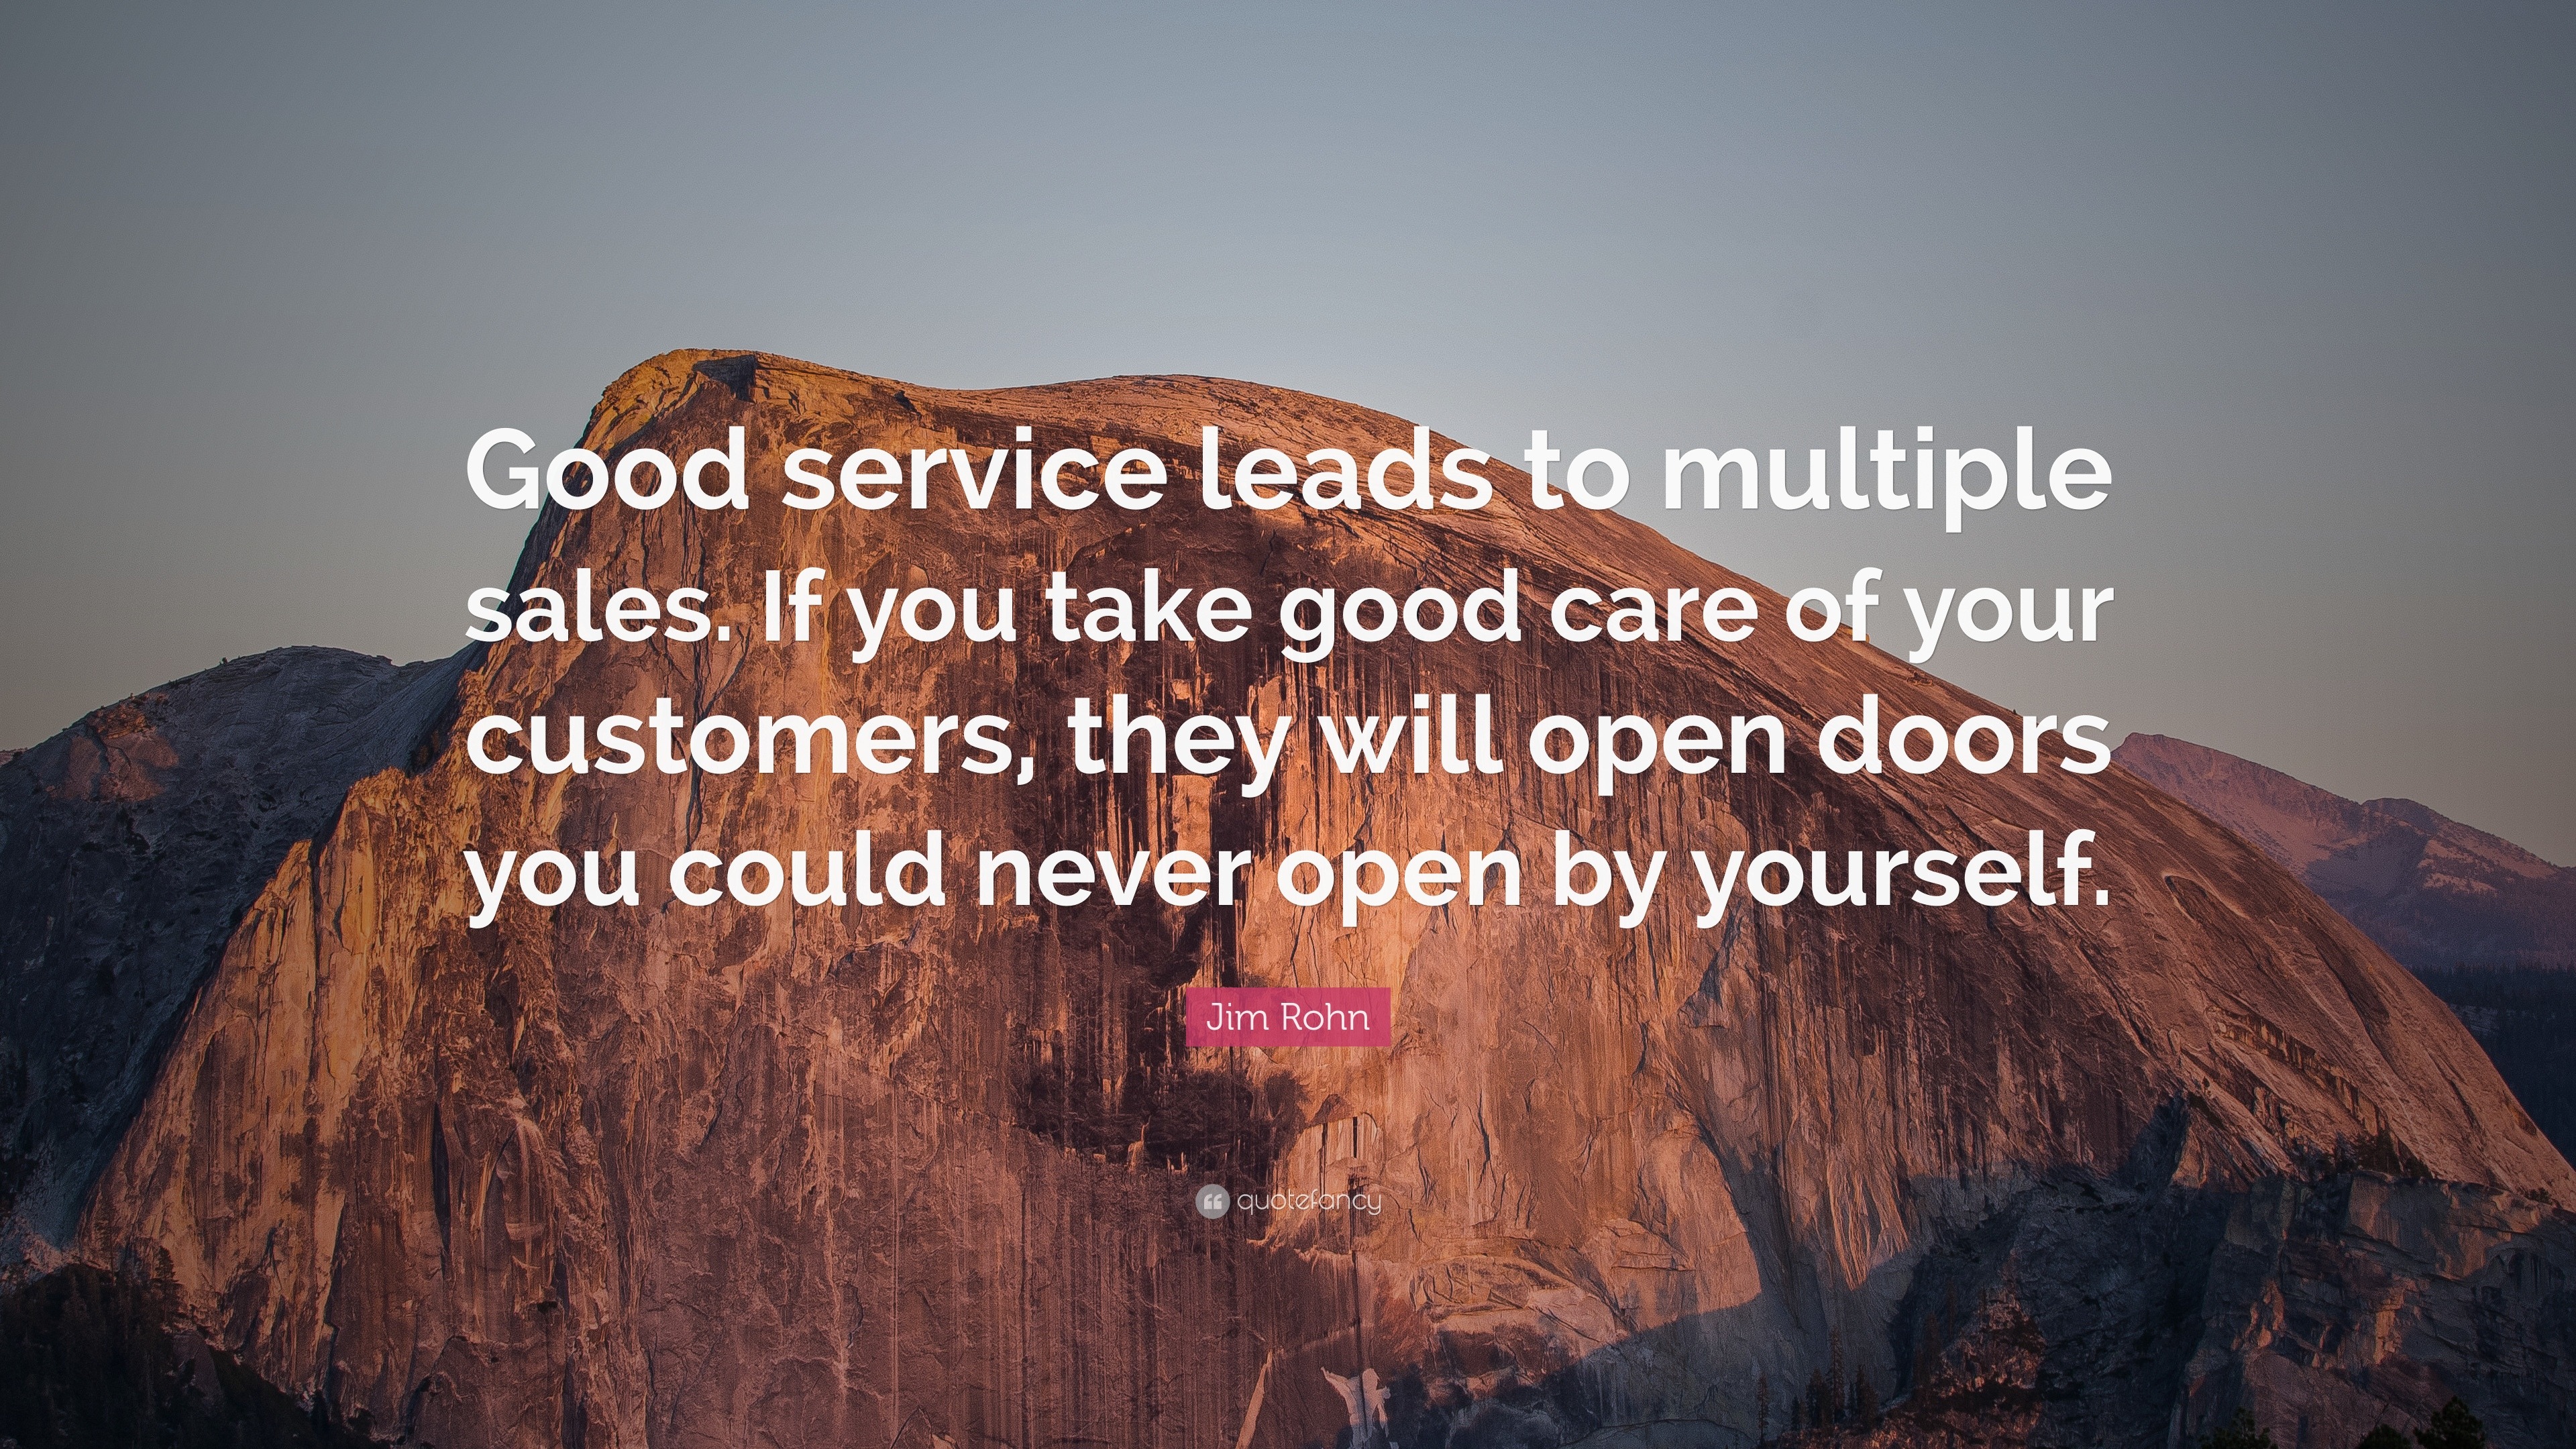 https://quotefancy.com/media/wallpaper/3840x2160/1717505-Jim-Rohn-Quote-Good-service-leads-to-multiple-sales-If-you-take.jpg